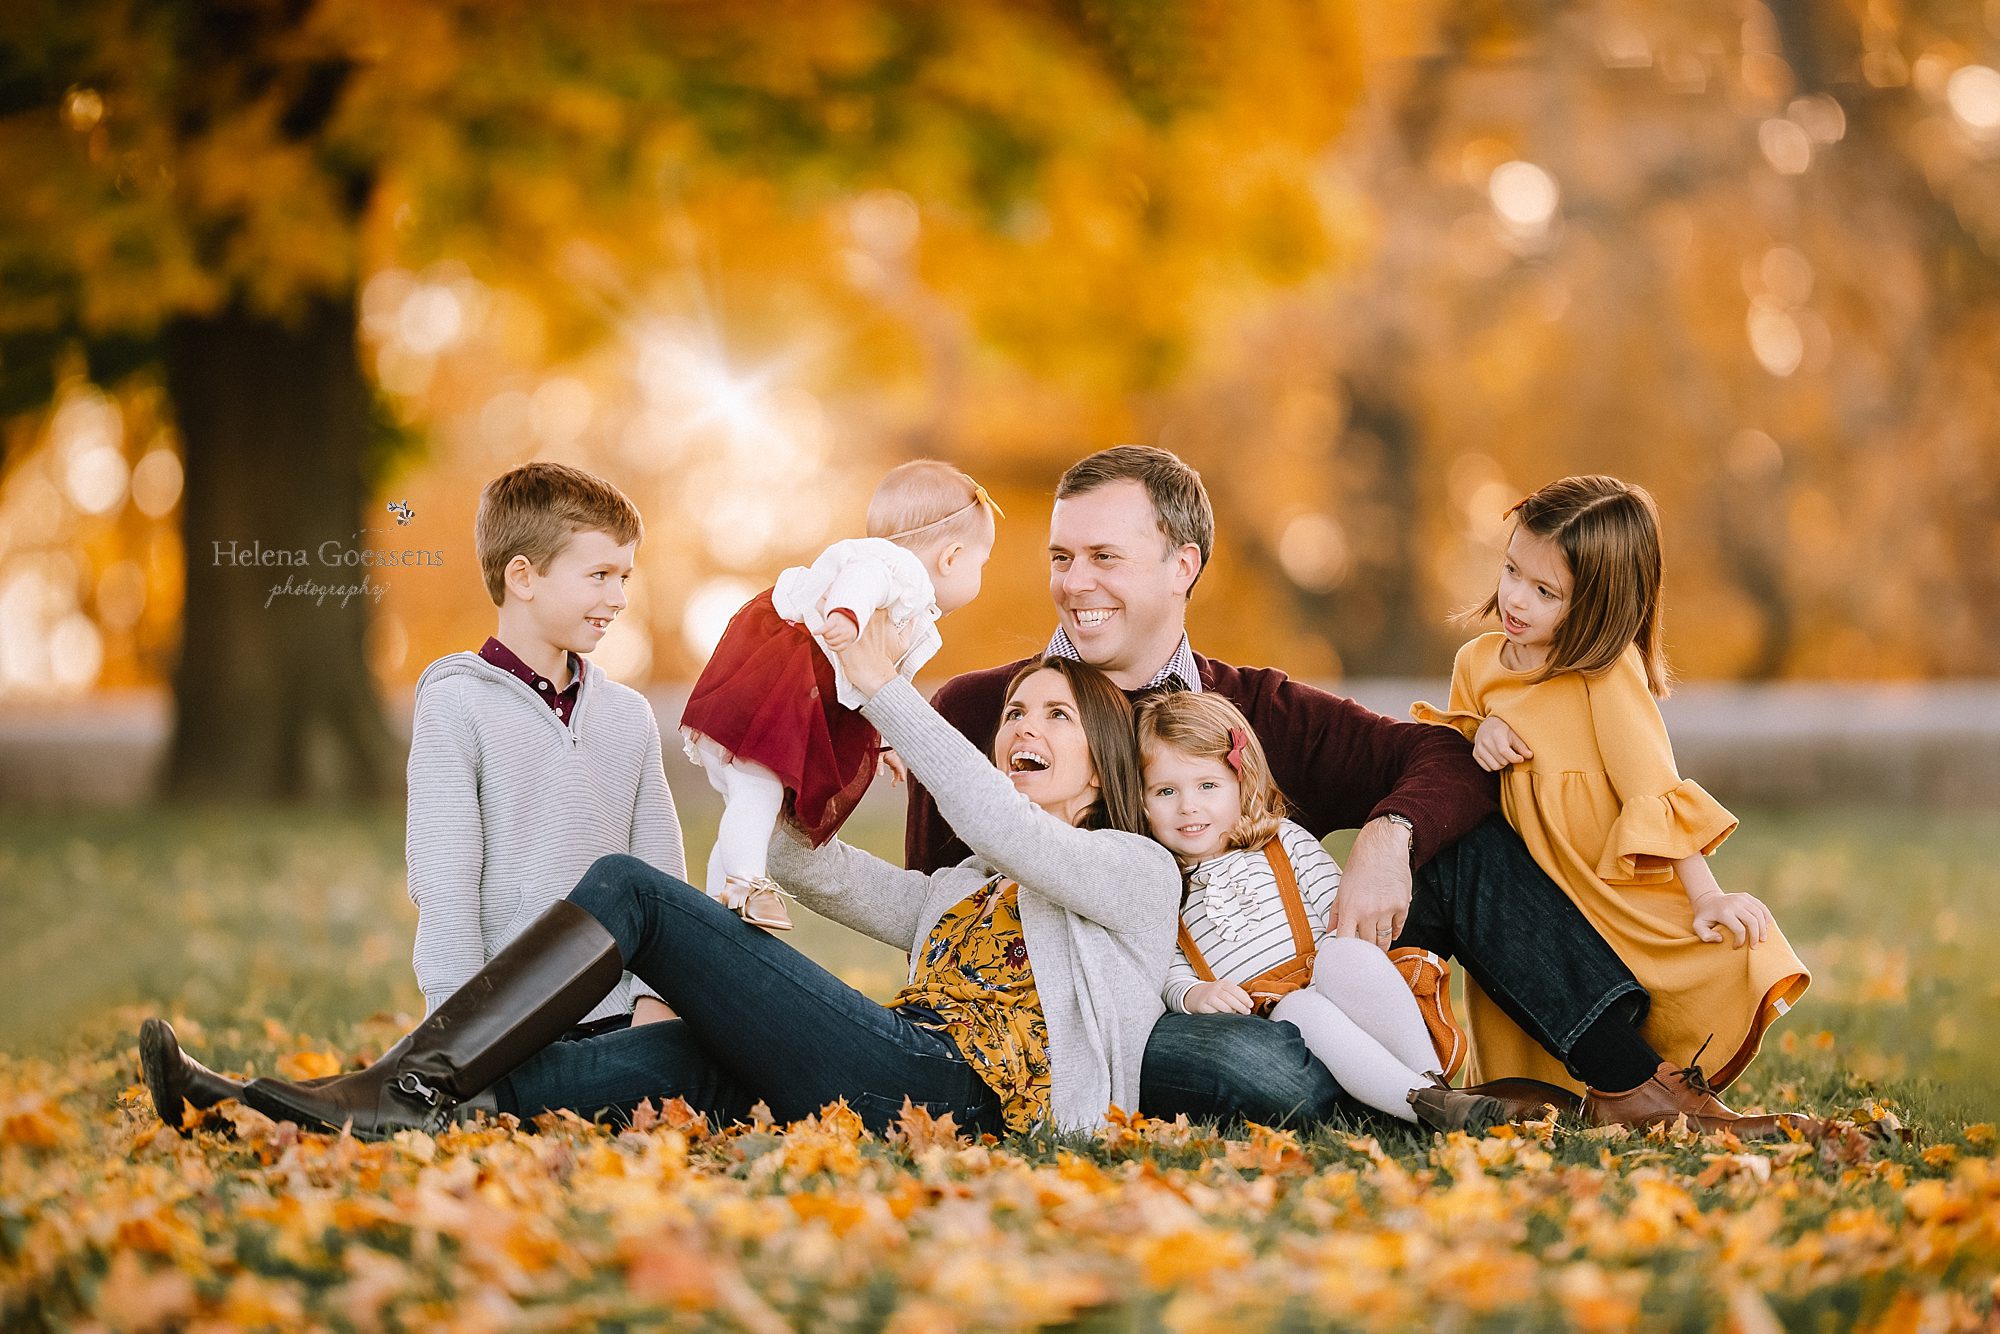 Family of 6 lying down in a fall afternoon